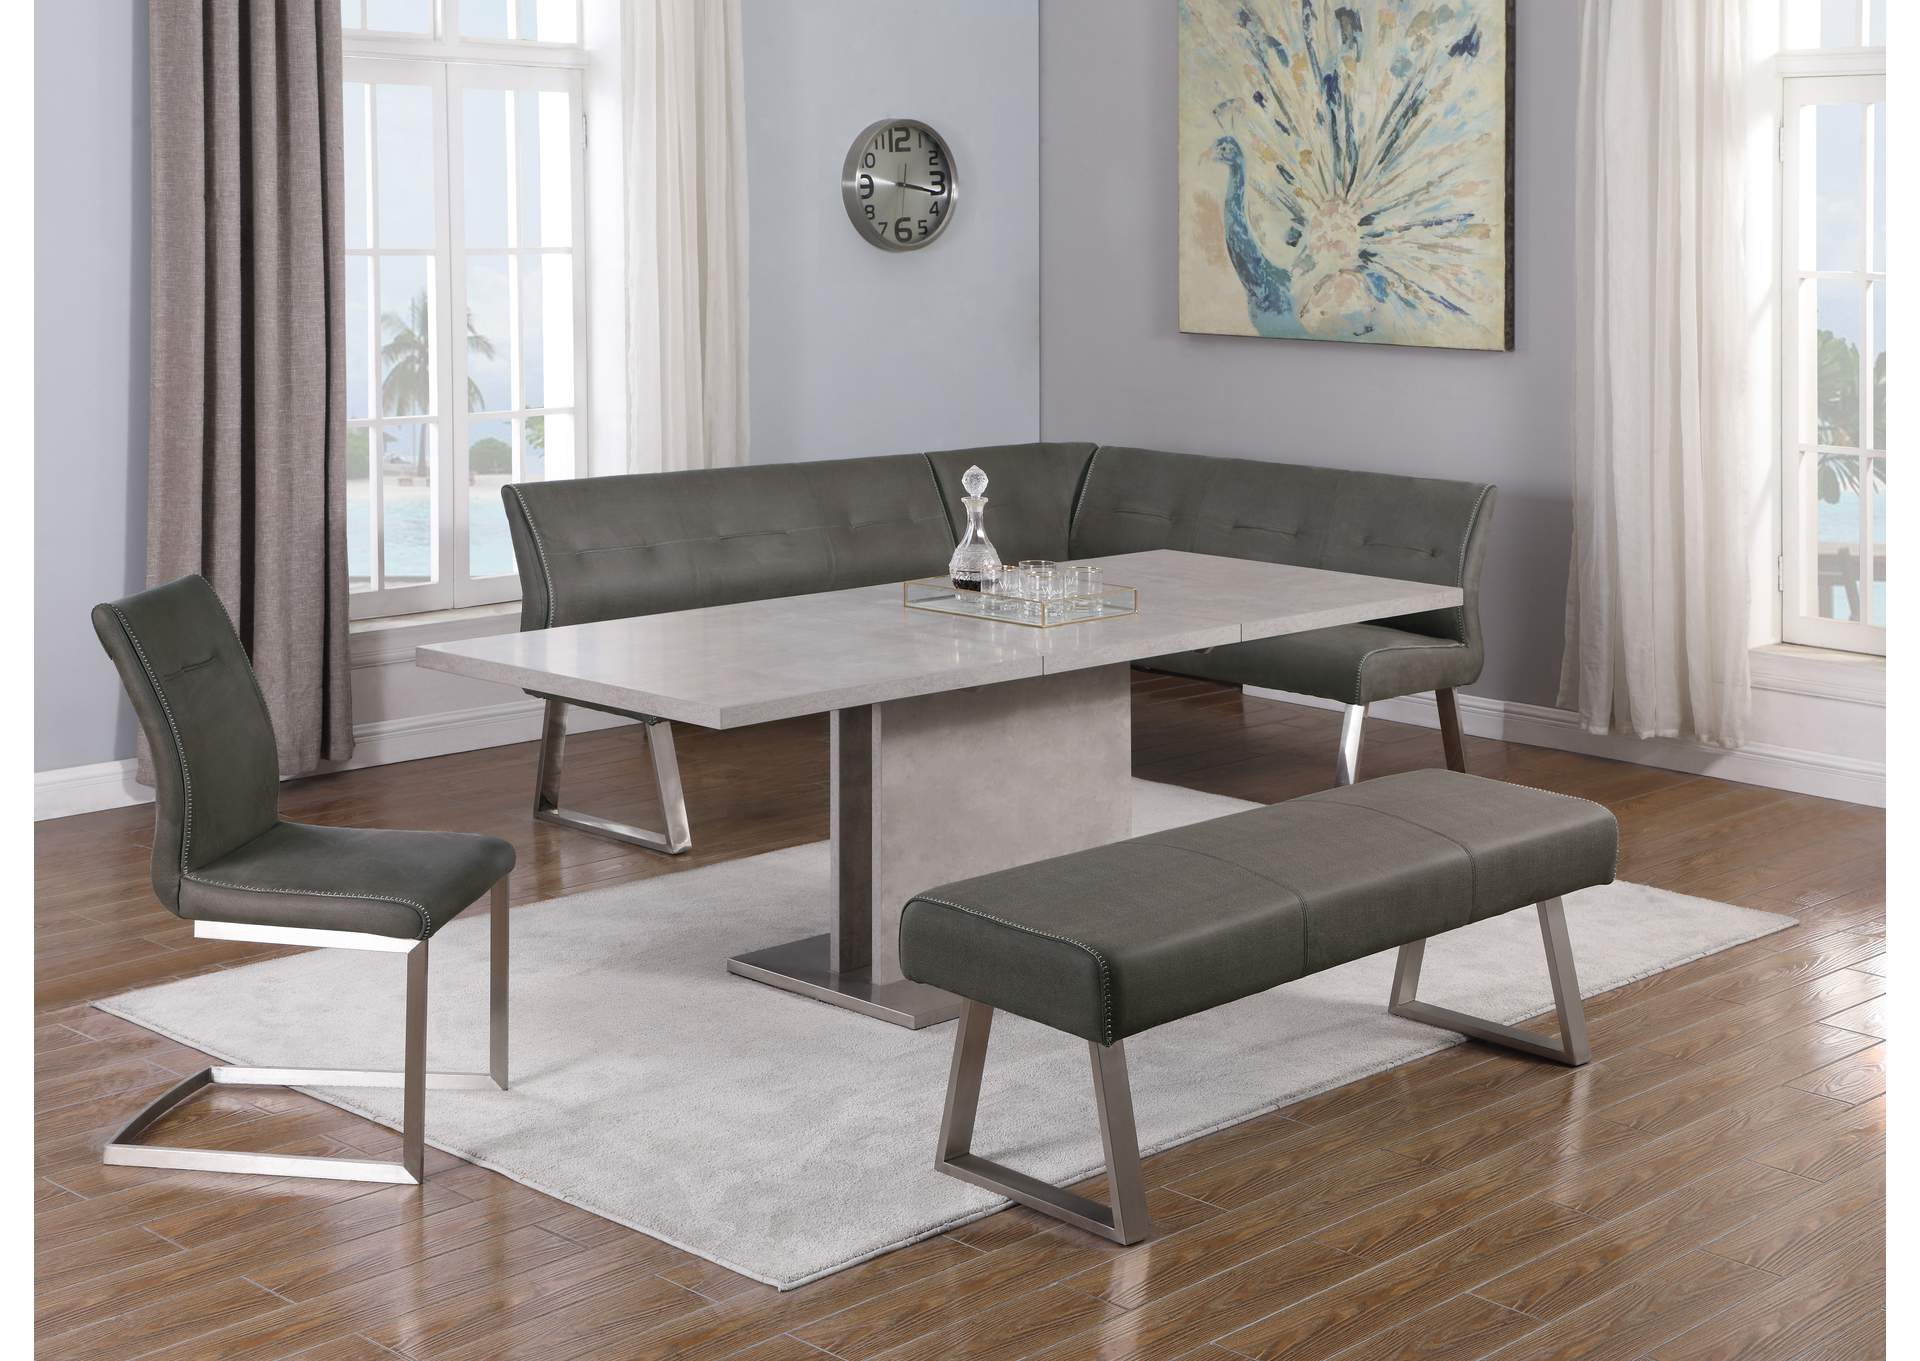 Contemporary Dining Set w/ Extendable Table & 4 Upholstered Chairs,Chintaly Imports